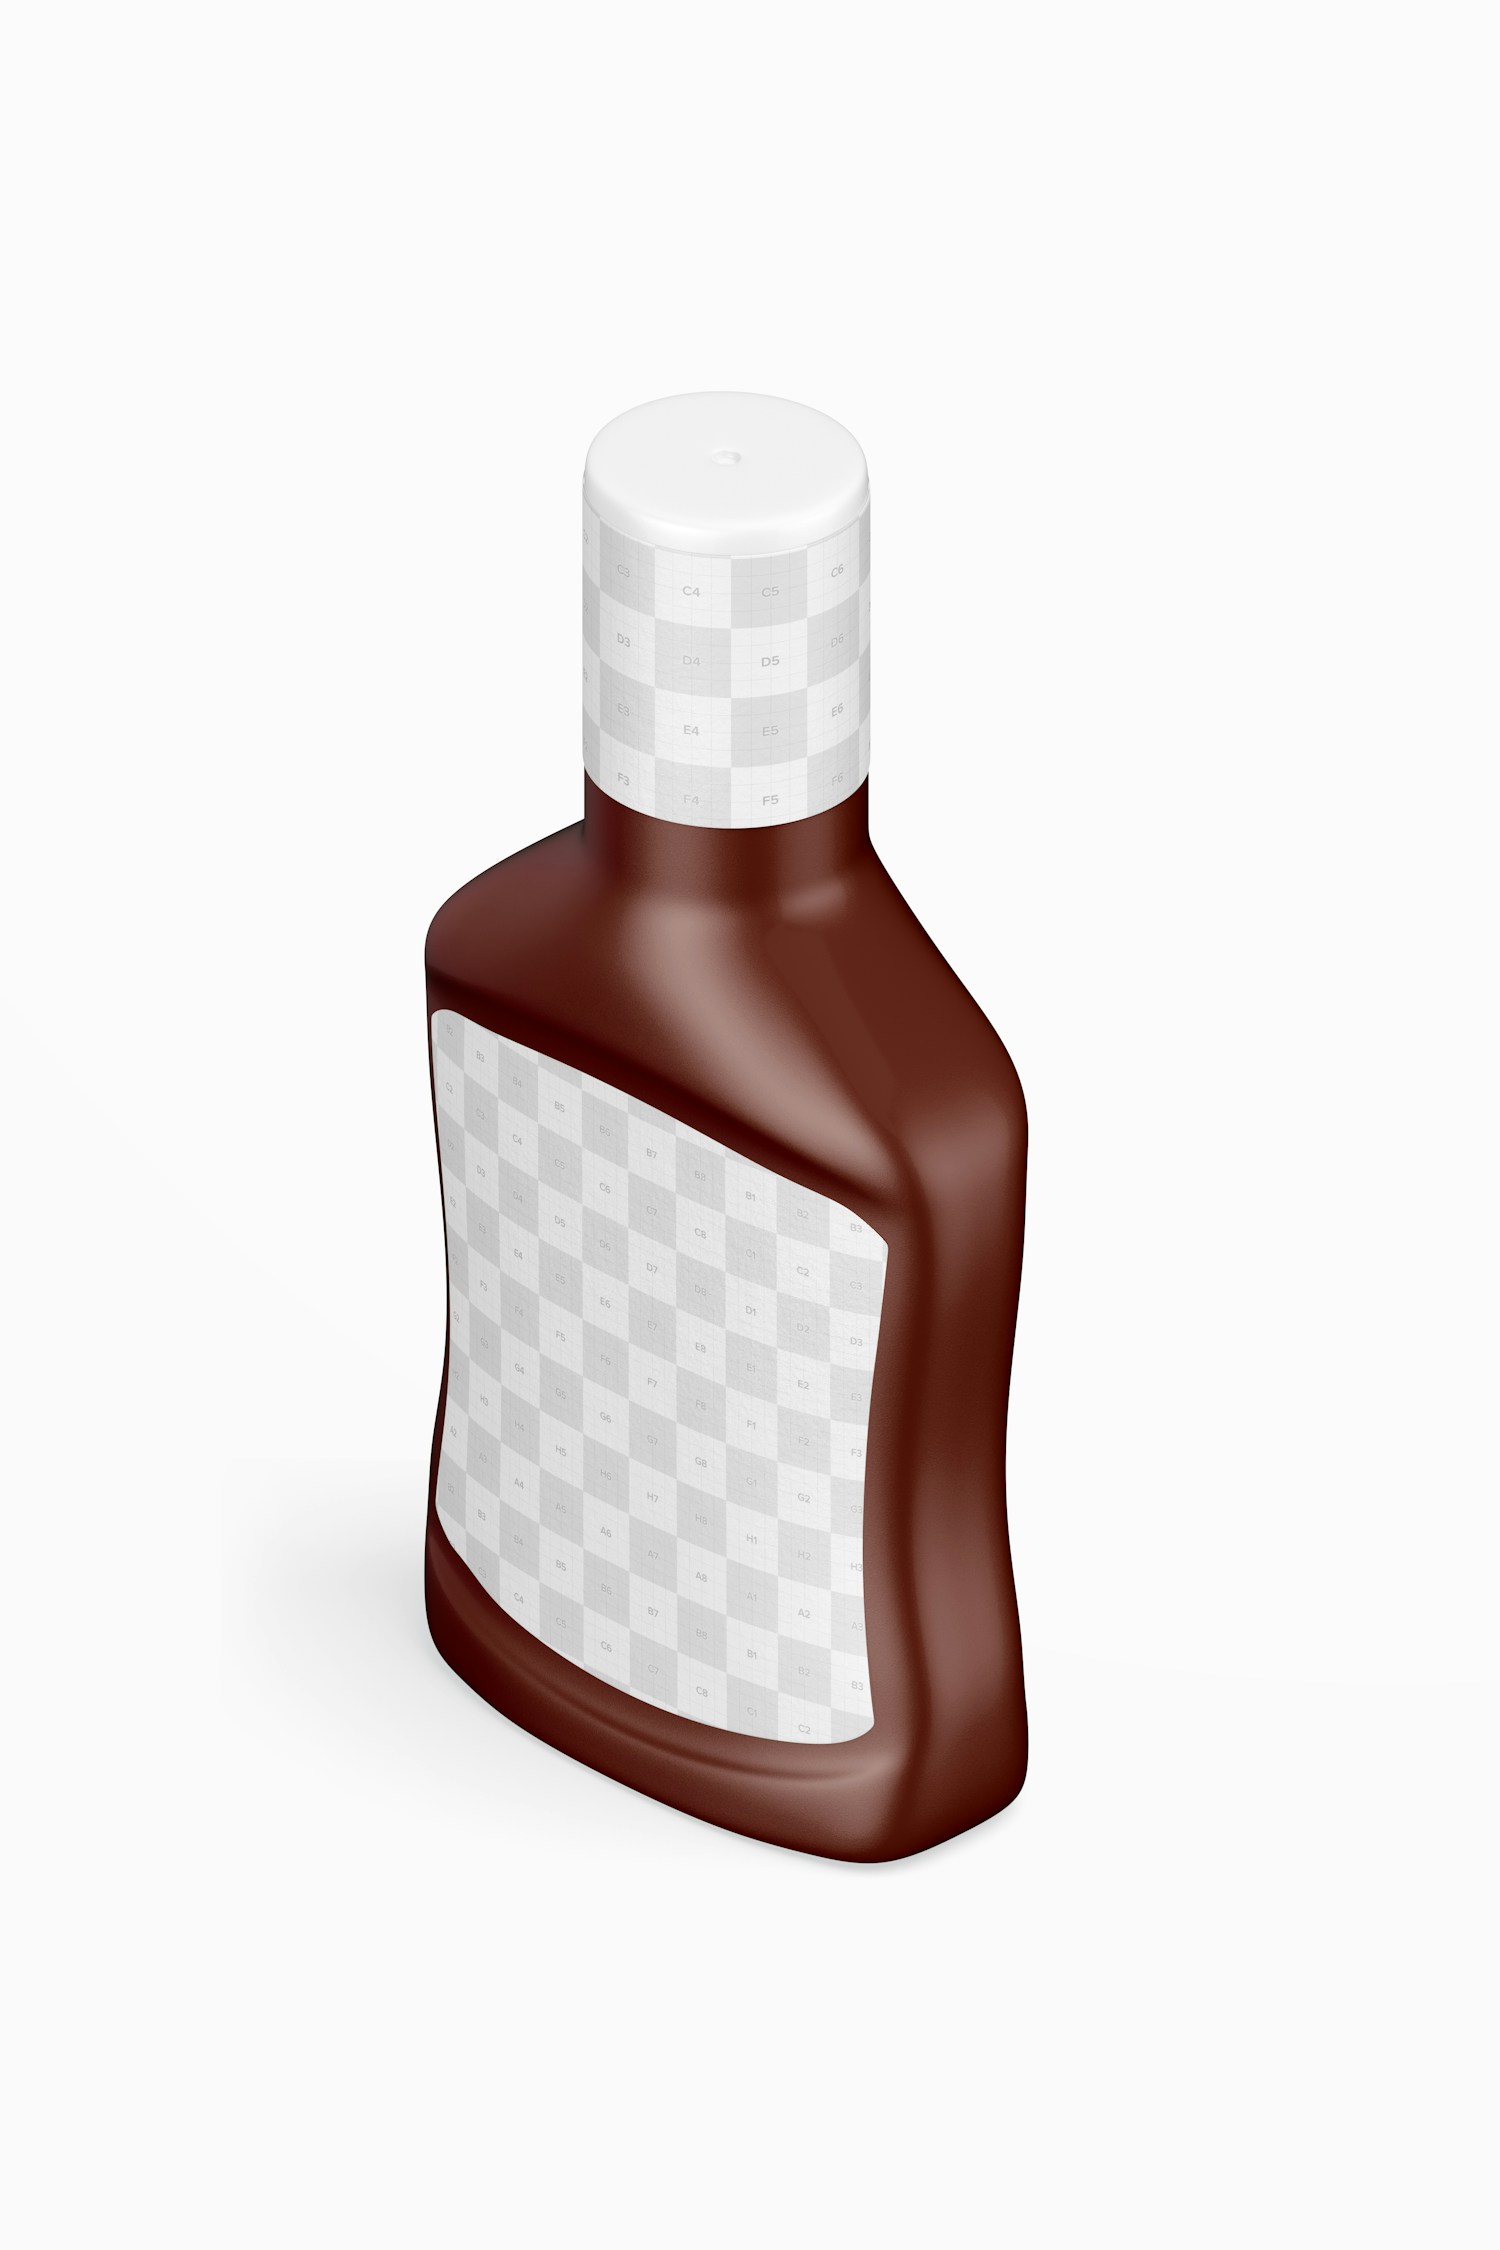 Barbecue Sauce Bottle Mockup, Isometric Left View